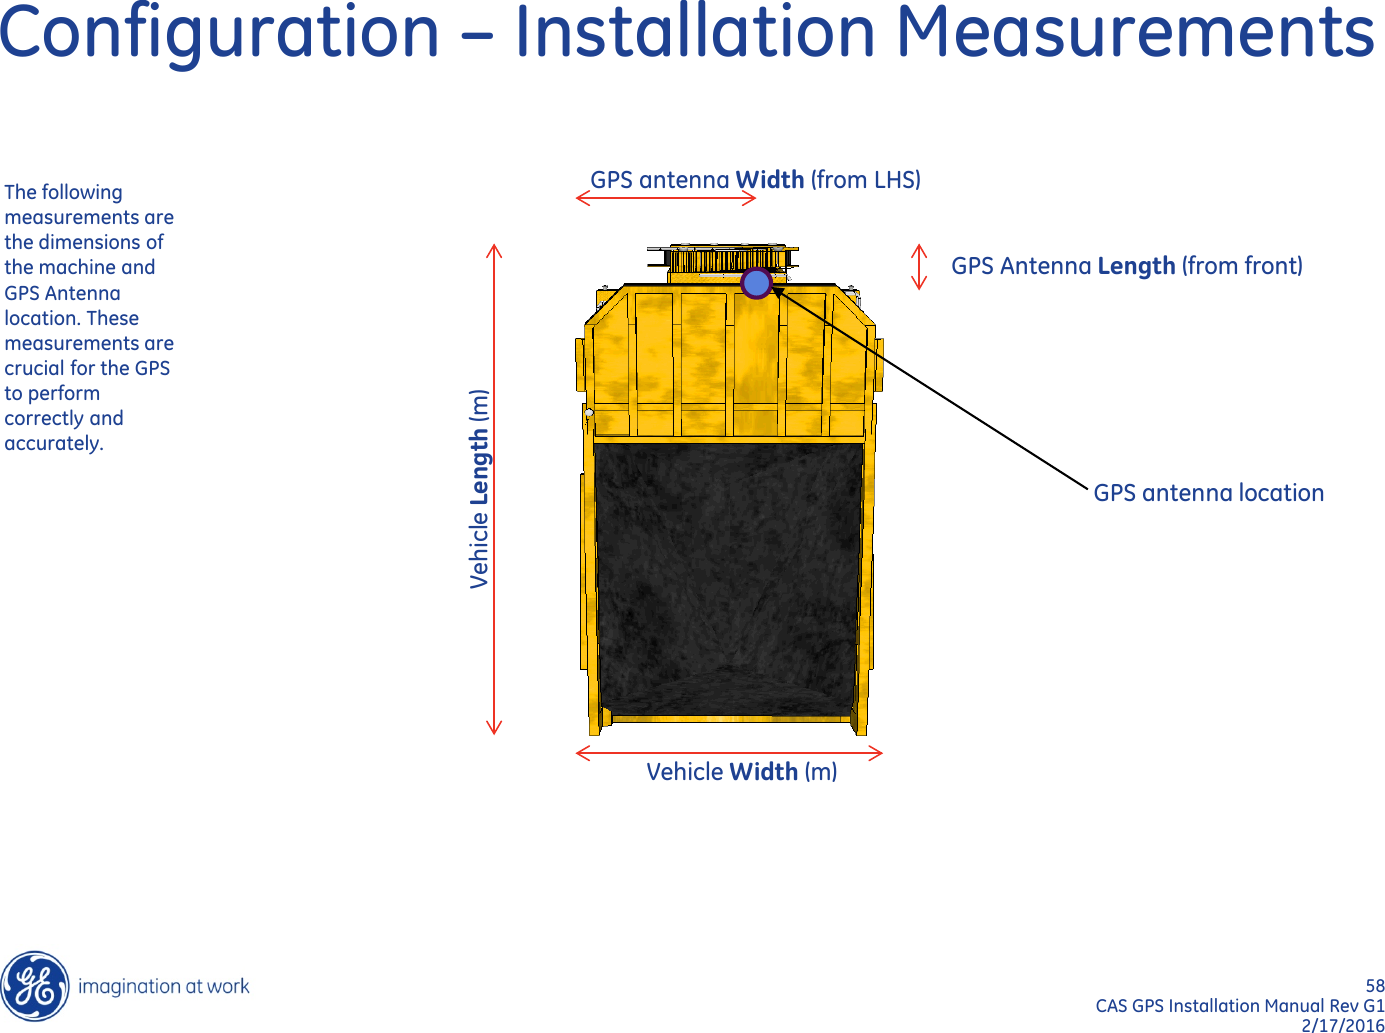 58  CAS GPS Installation Manual Rev G1 2/17/2016 Configuration – Installation Measurements Vehicle Length (m) Vehicle Width (m) GPS Antenna Length (from front) The following measurements are the dimensions of the machine and GPS Antenna location. These measurements are crucial for the GPS to perform correctly and accurately.  GPS antenna Width (from LHS) GPS antenna location 